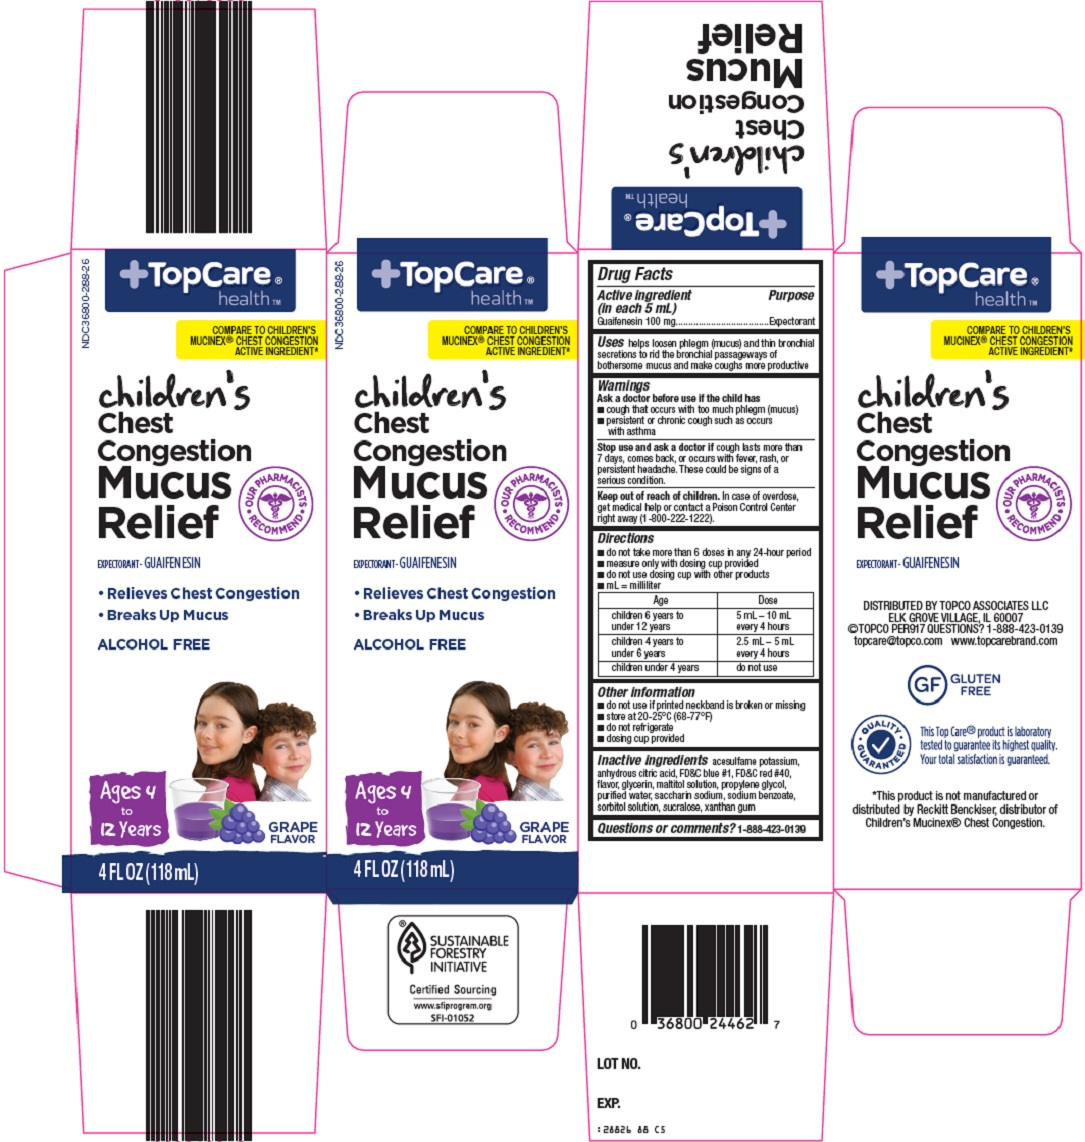 childrens-mucus-relief-image